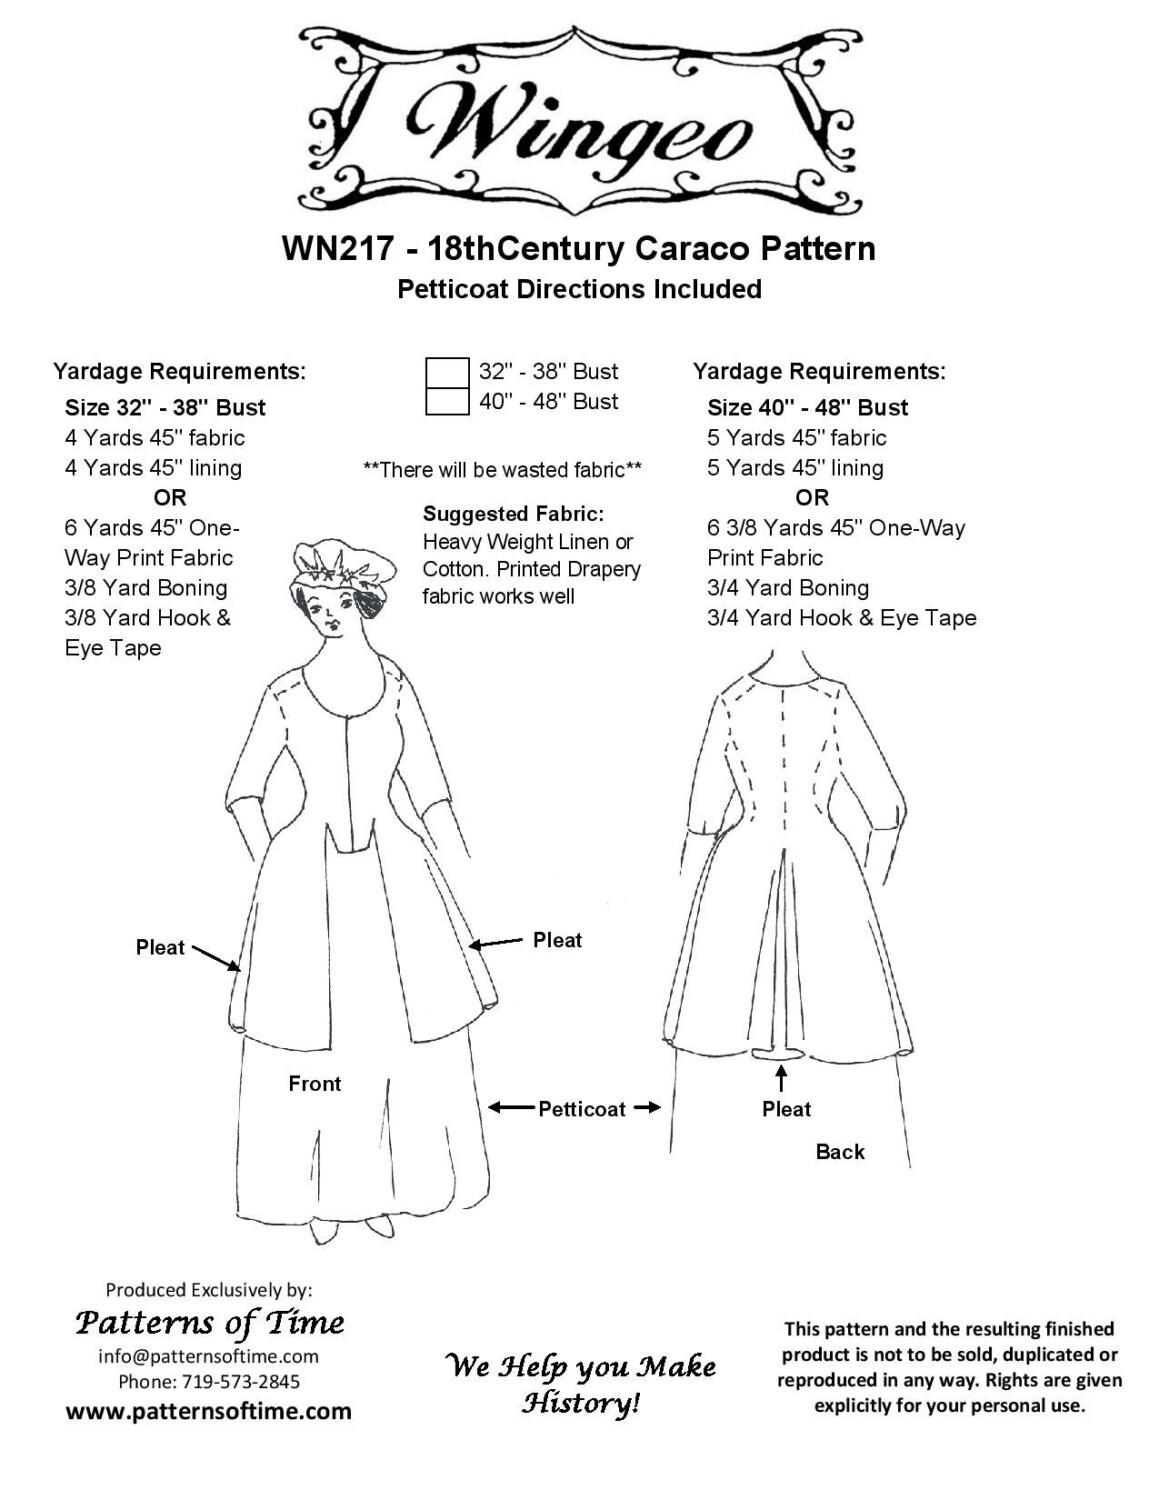 WN217 18th Century Caraco Sewing Patterns by Wingeo